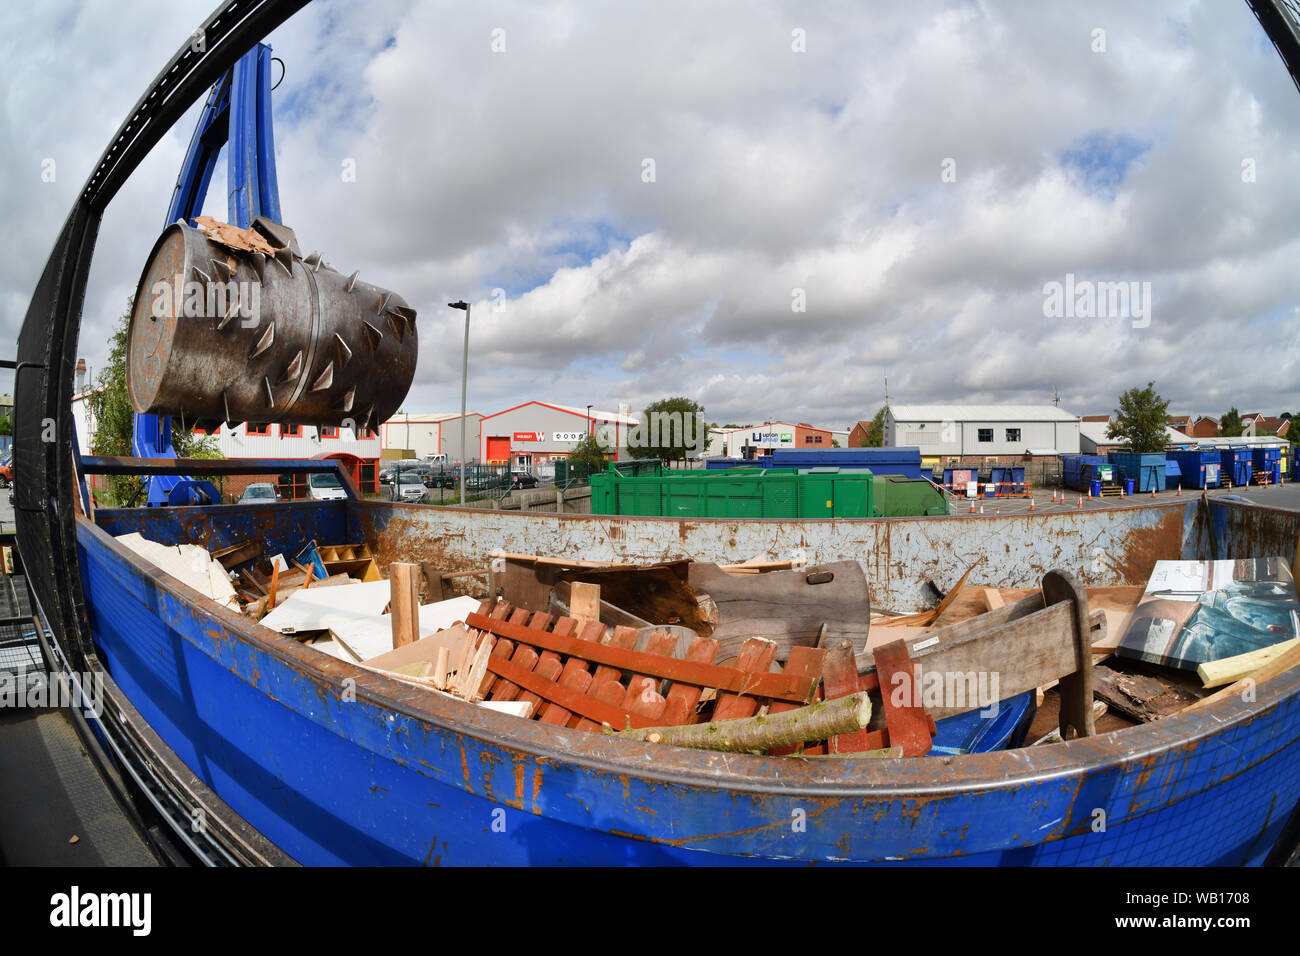 hydraulic arm crushing wood in container at household waste recycling centre united kingdom Stock Photo